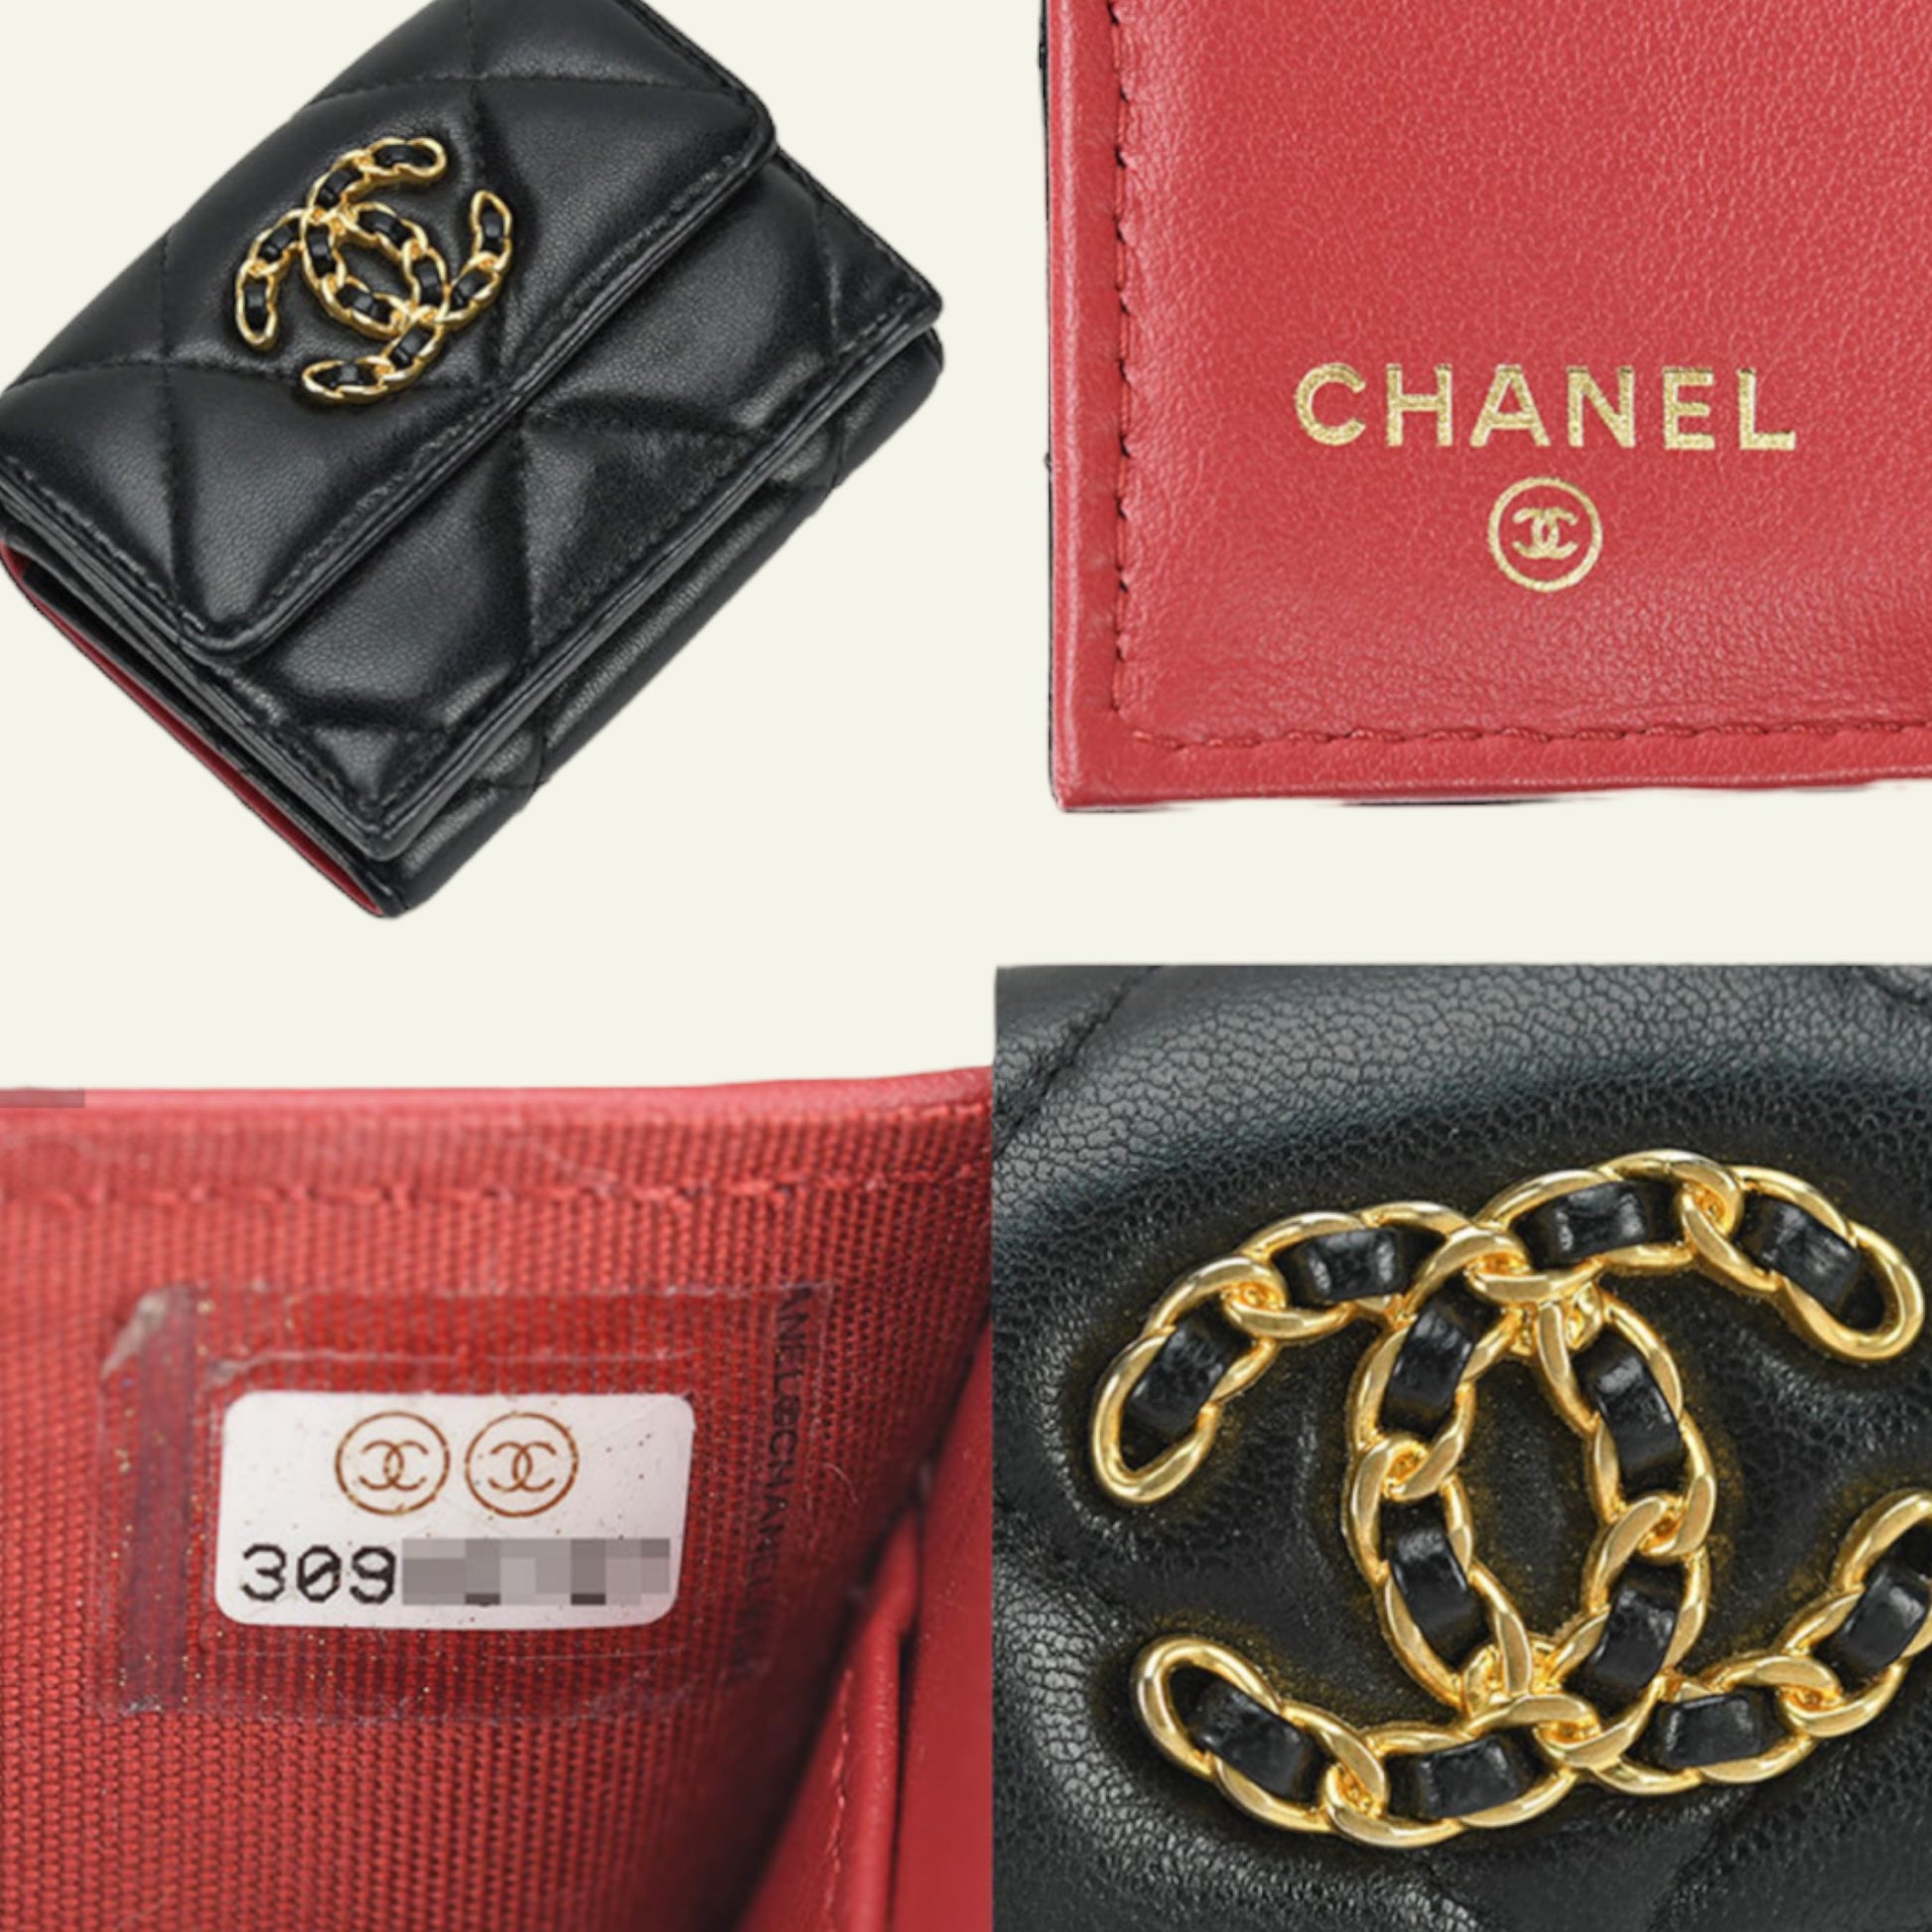 Chanel 19 Small Flap Wallet – Laluxurious